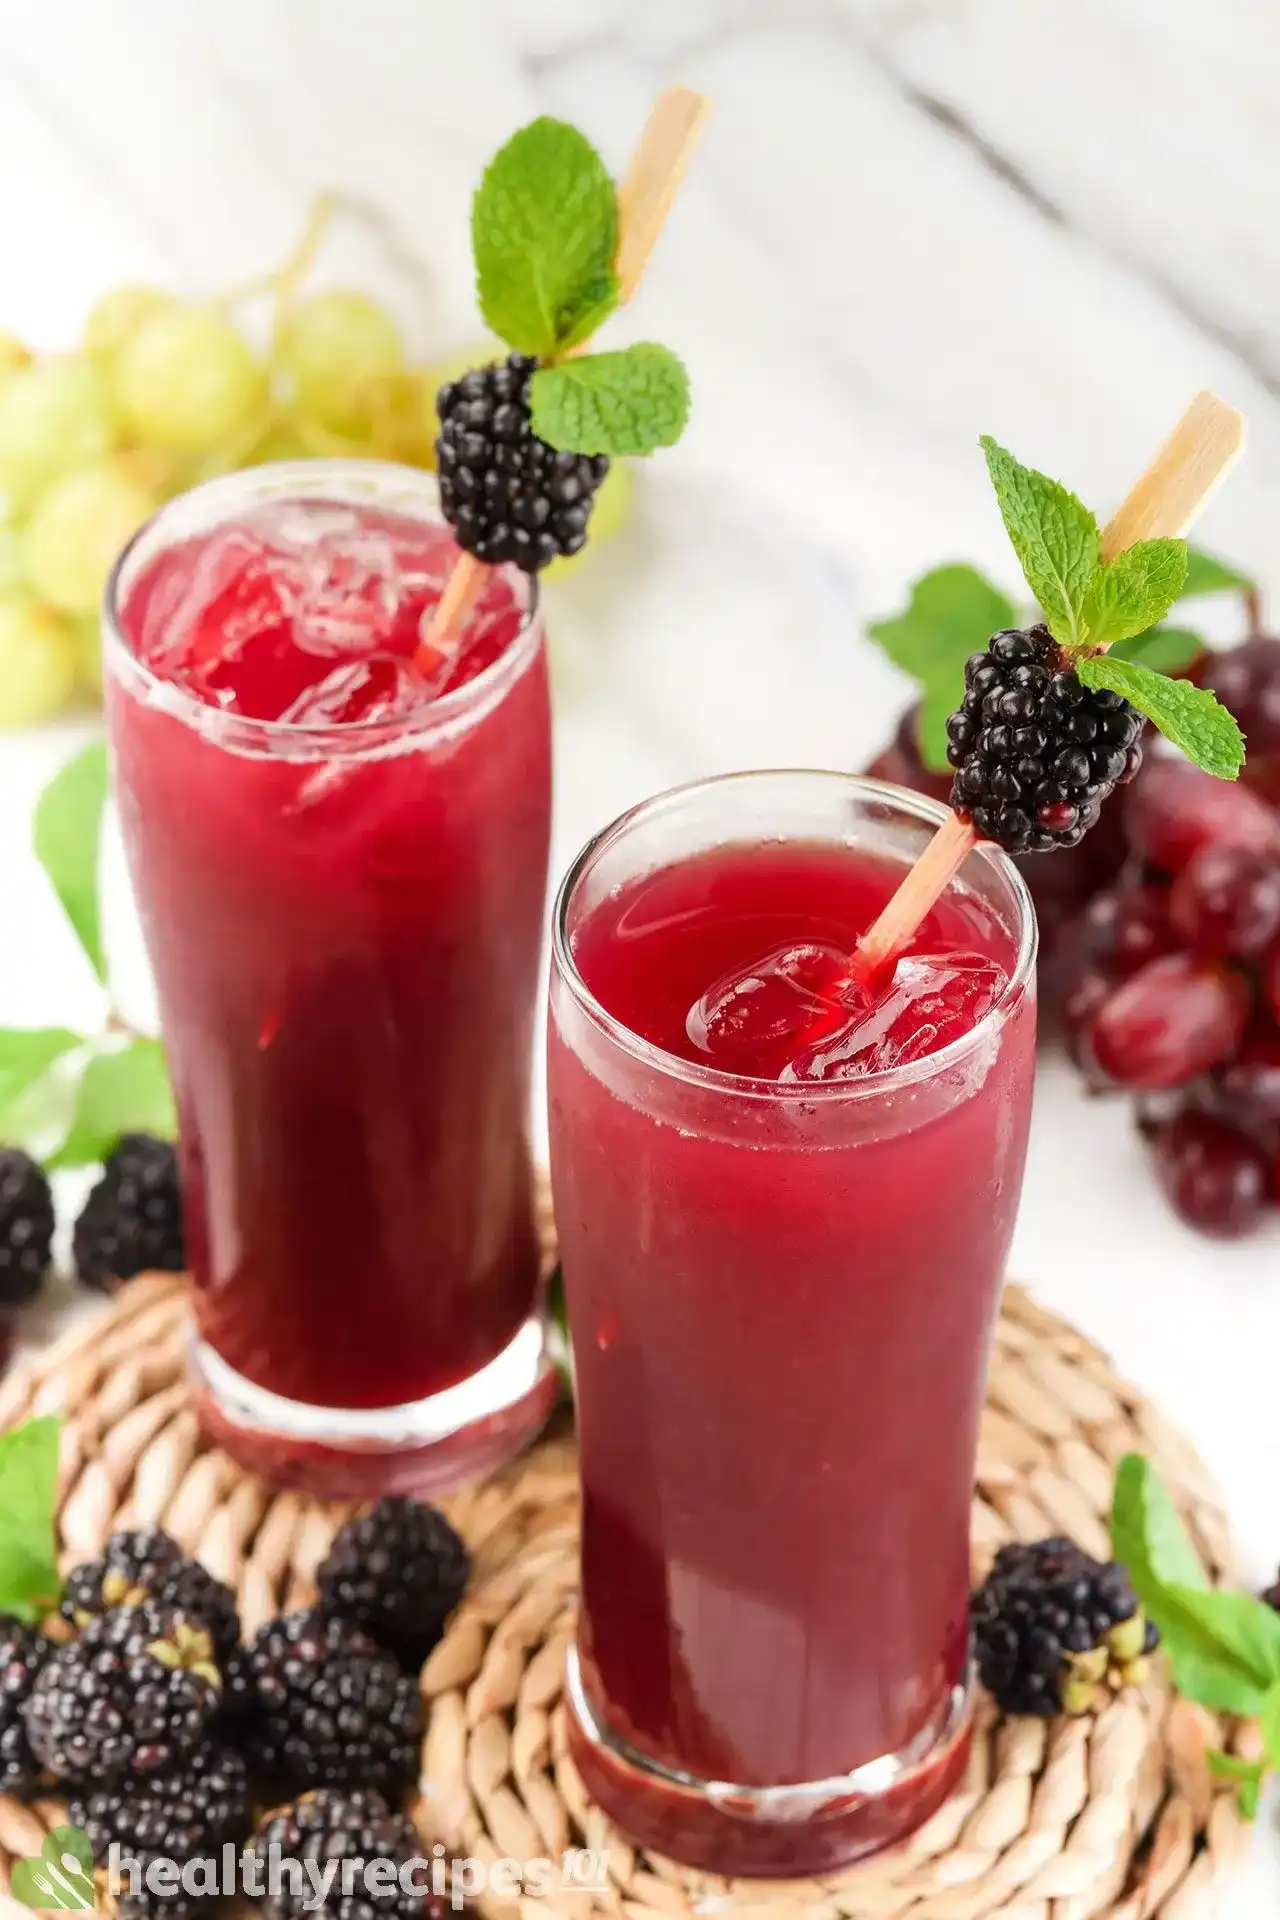 Mixed Berry Juice Benefits Is It Good for You? Strawberry, Raspberry, Blueberry, Blackberry Juice Benefits